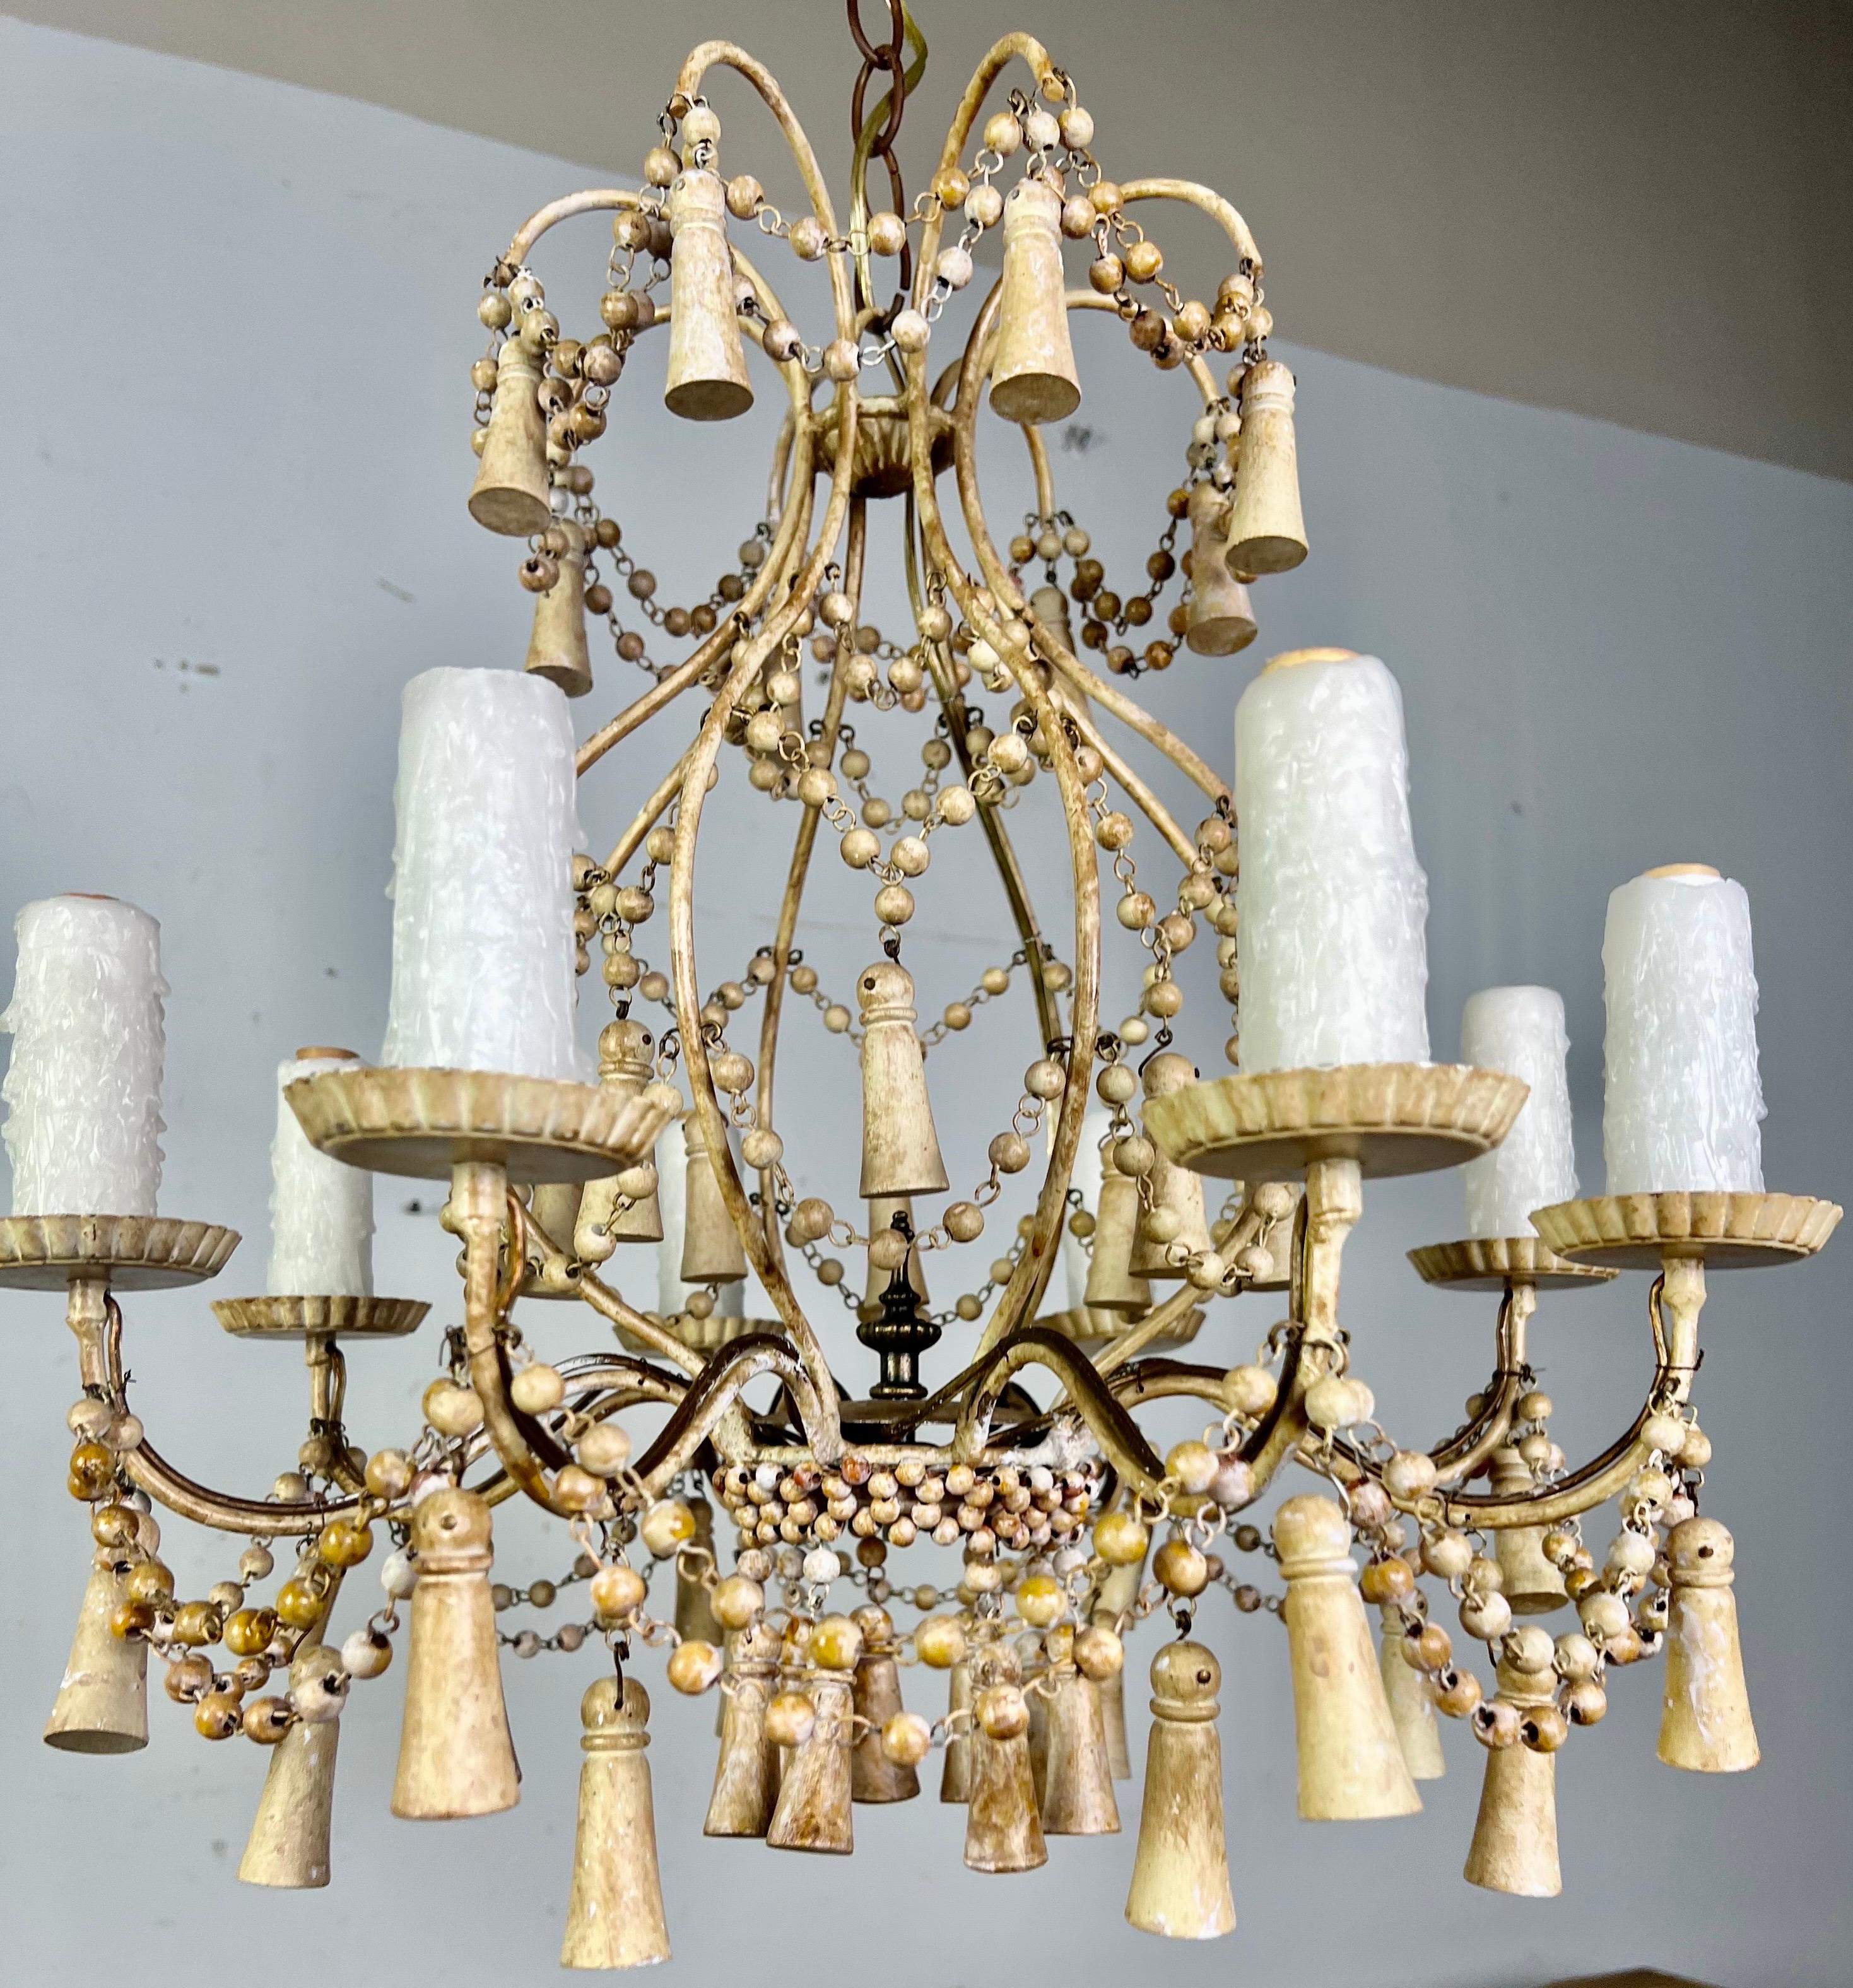 6-light Italian painted wood beaded chandelier with wood tassels throughout. the fixture is newly rewired with chain and canopy included.